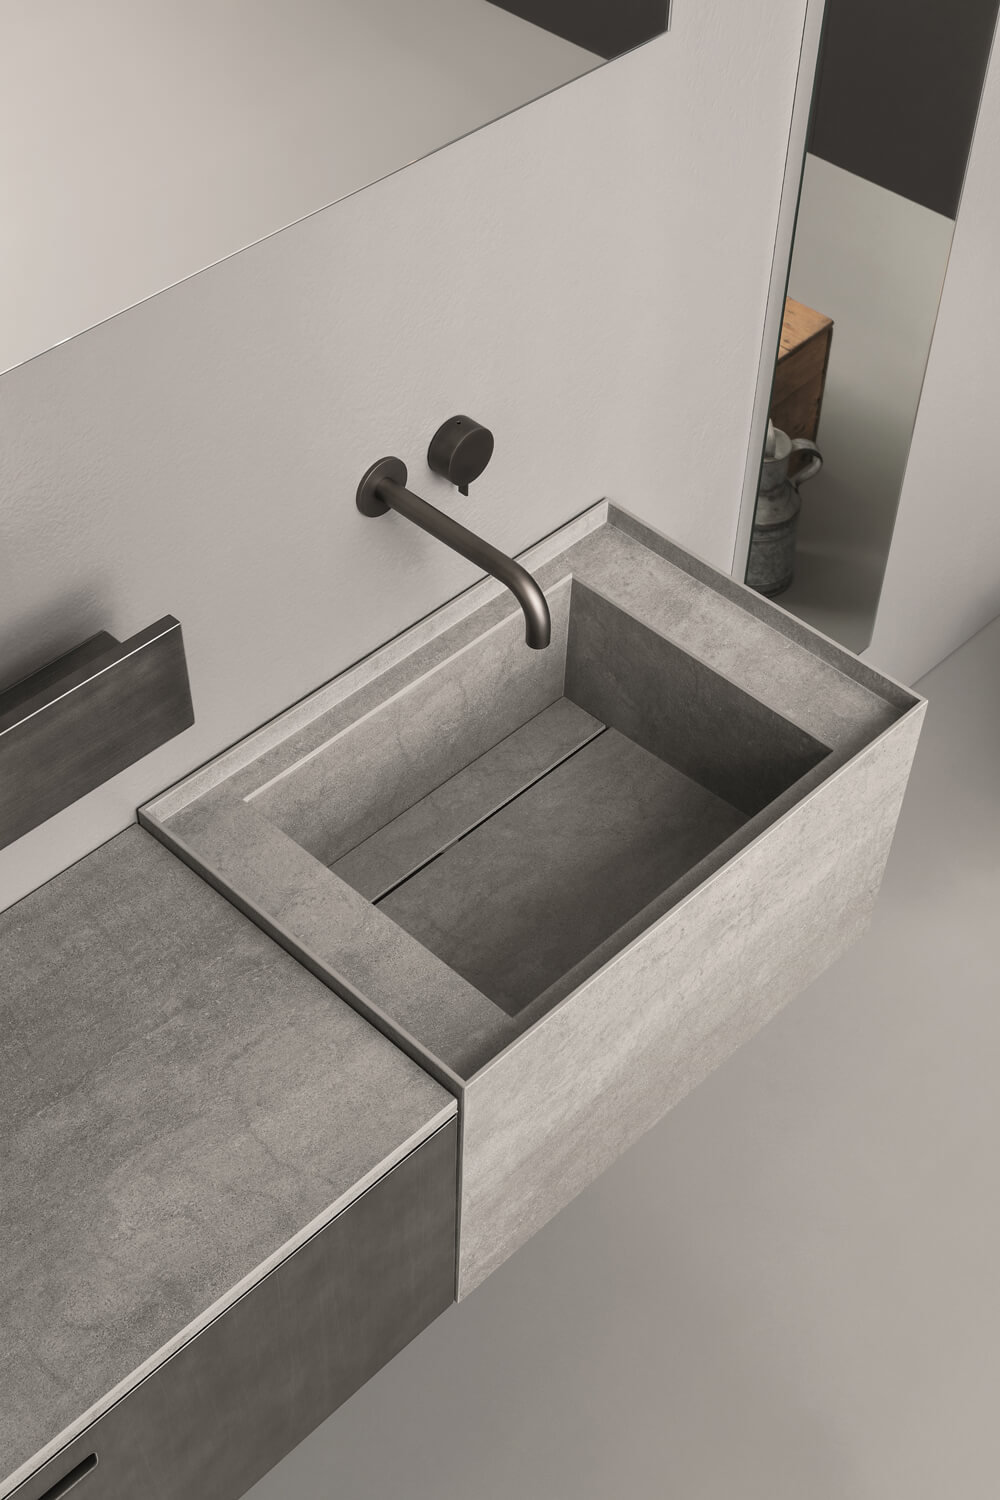 Washbasin and top in Savoia Grigia Laminam; easy to clean, hygienic, resistant to scratches and impact, and impermeable to acids, water, and oil. 